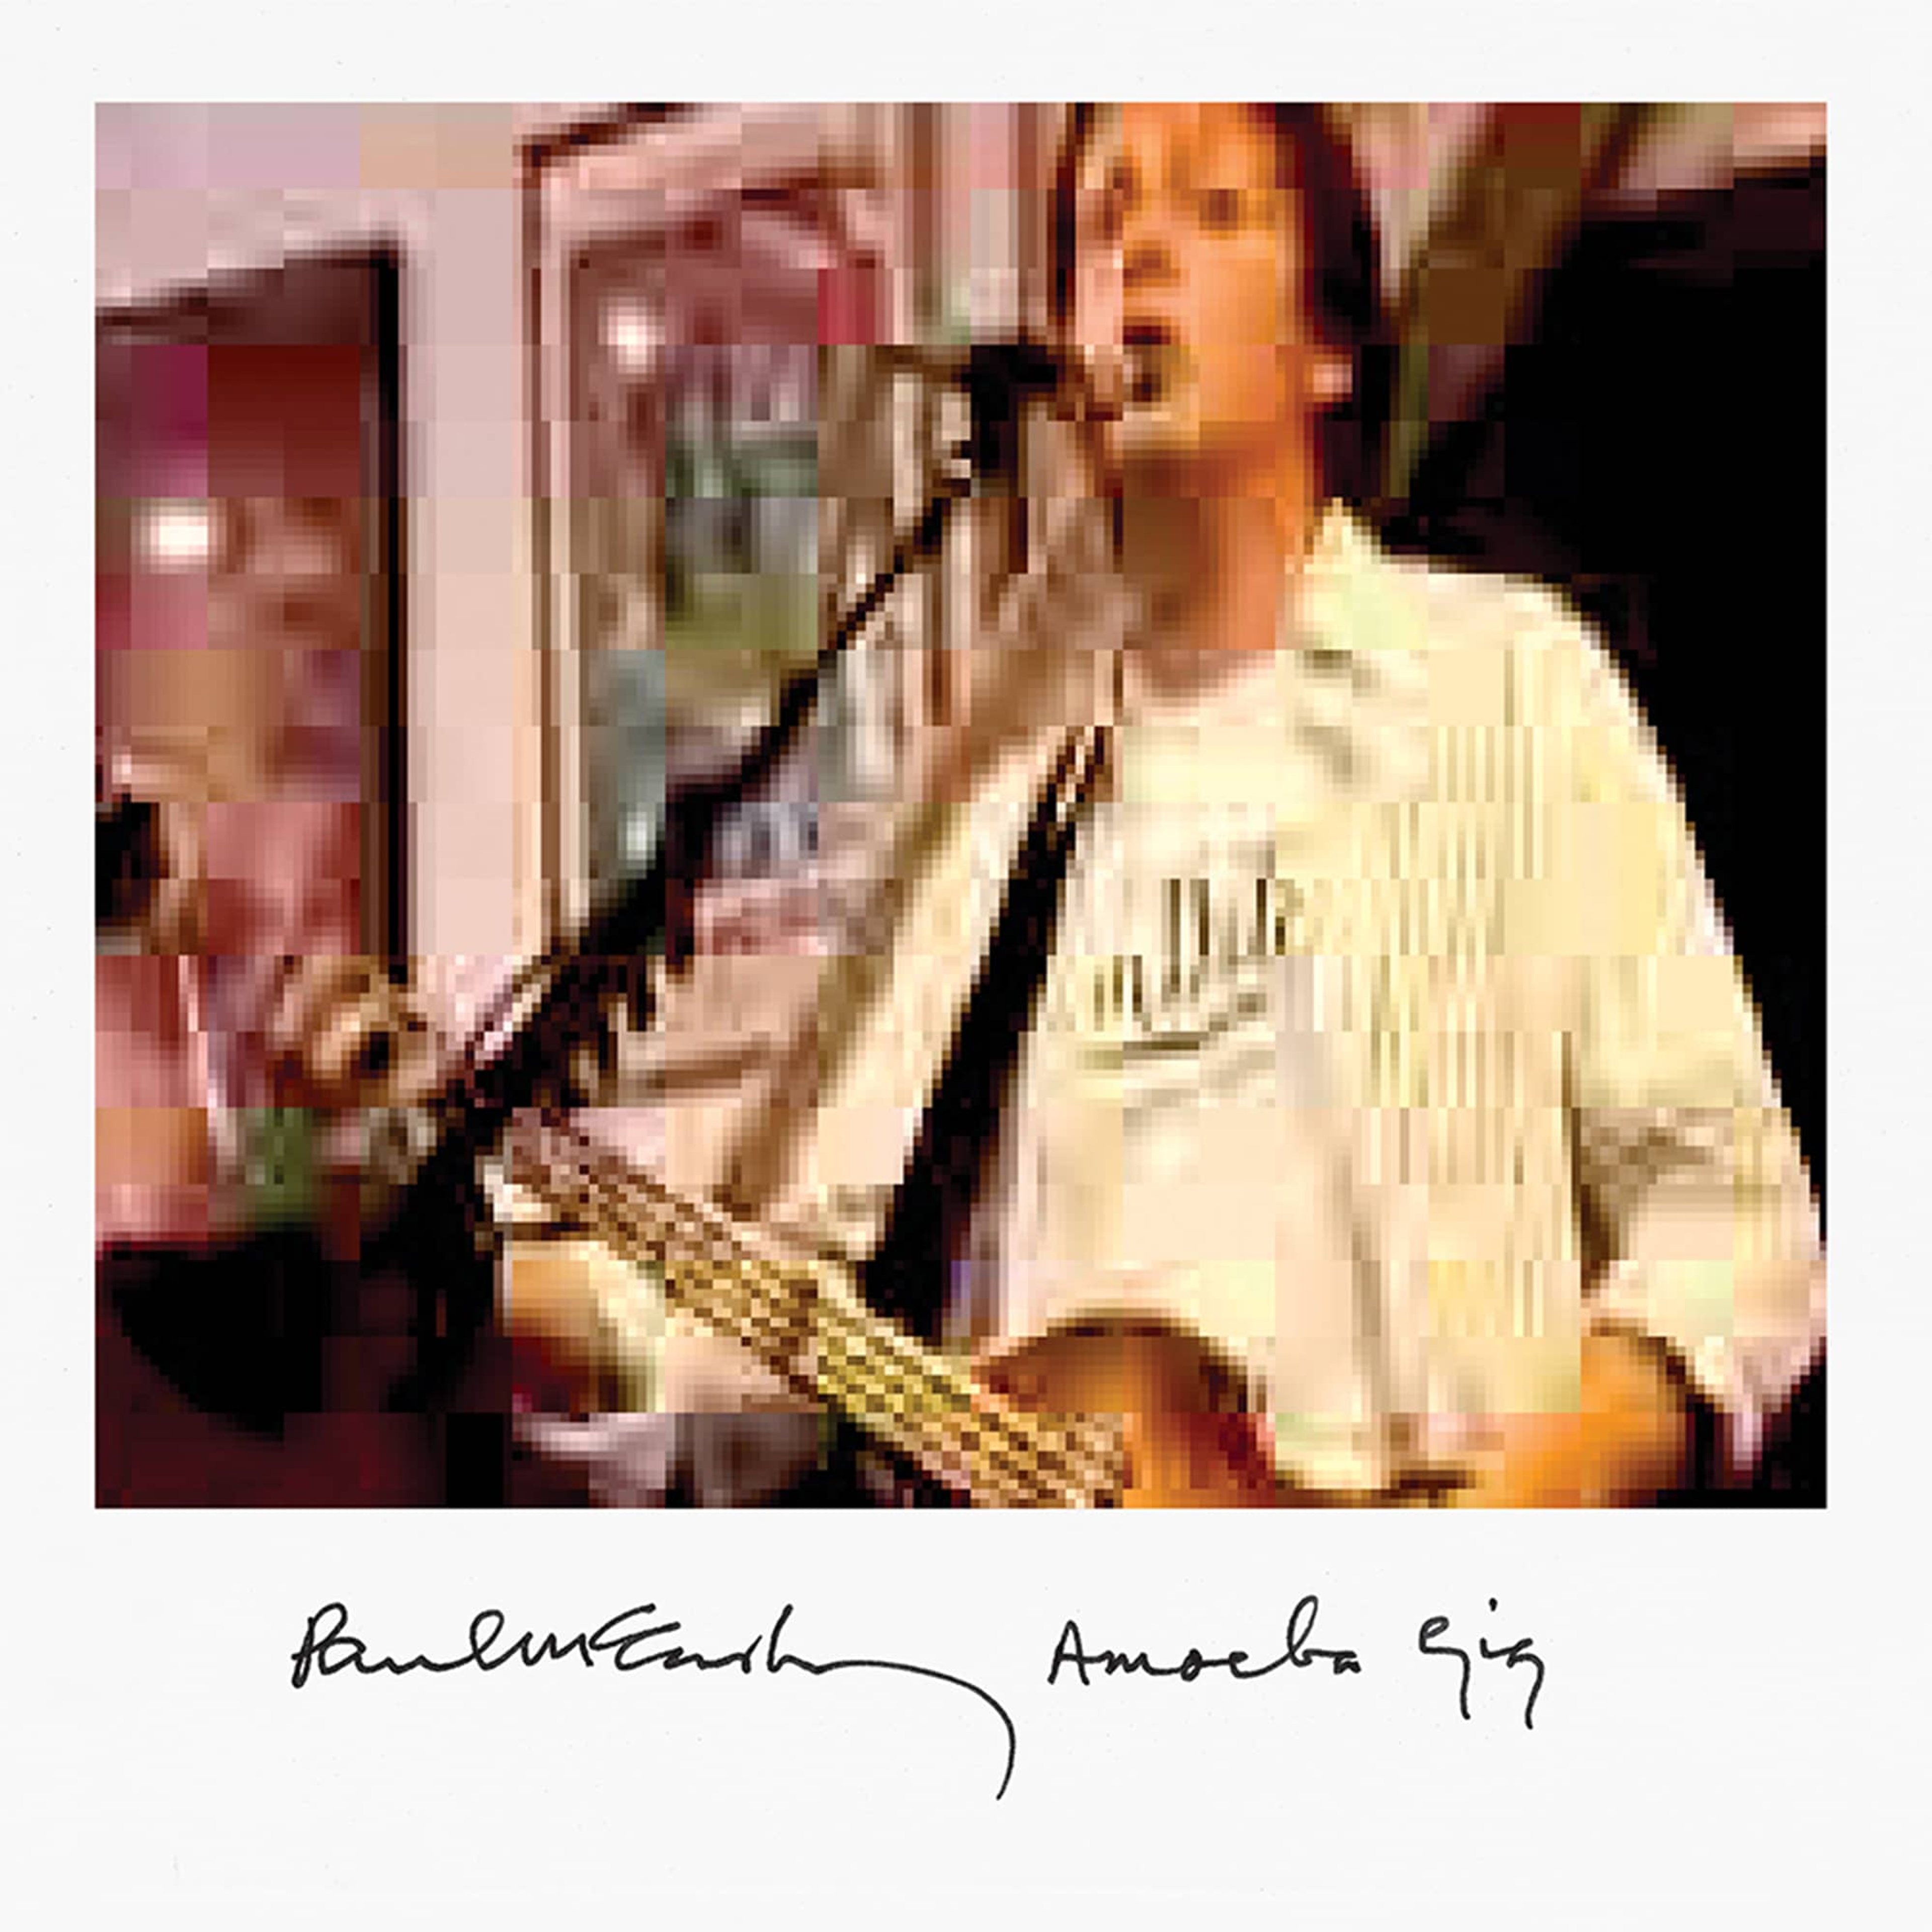 Amoeba Gig album cover features Paul's handwritten name and album logo plus a photo of him at the 2007 show.